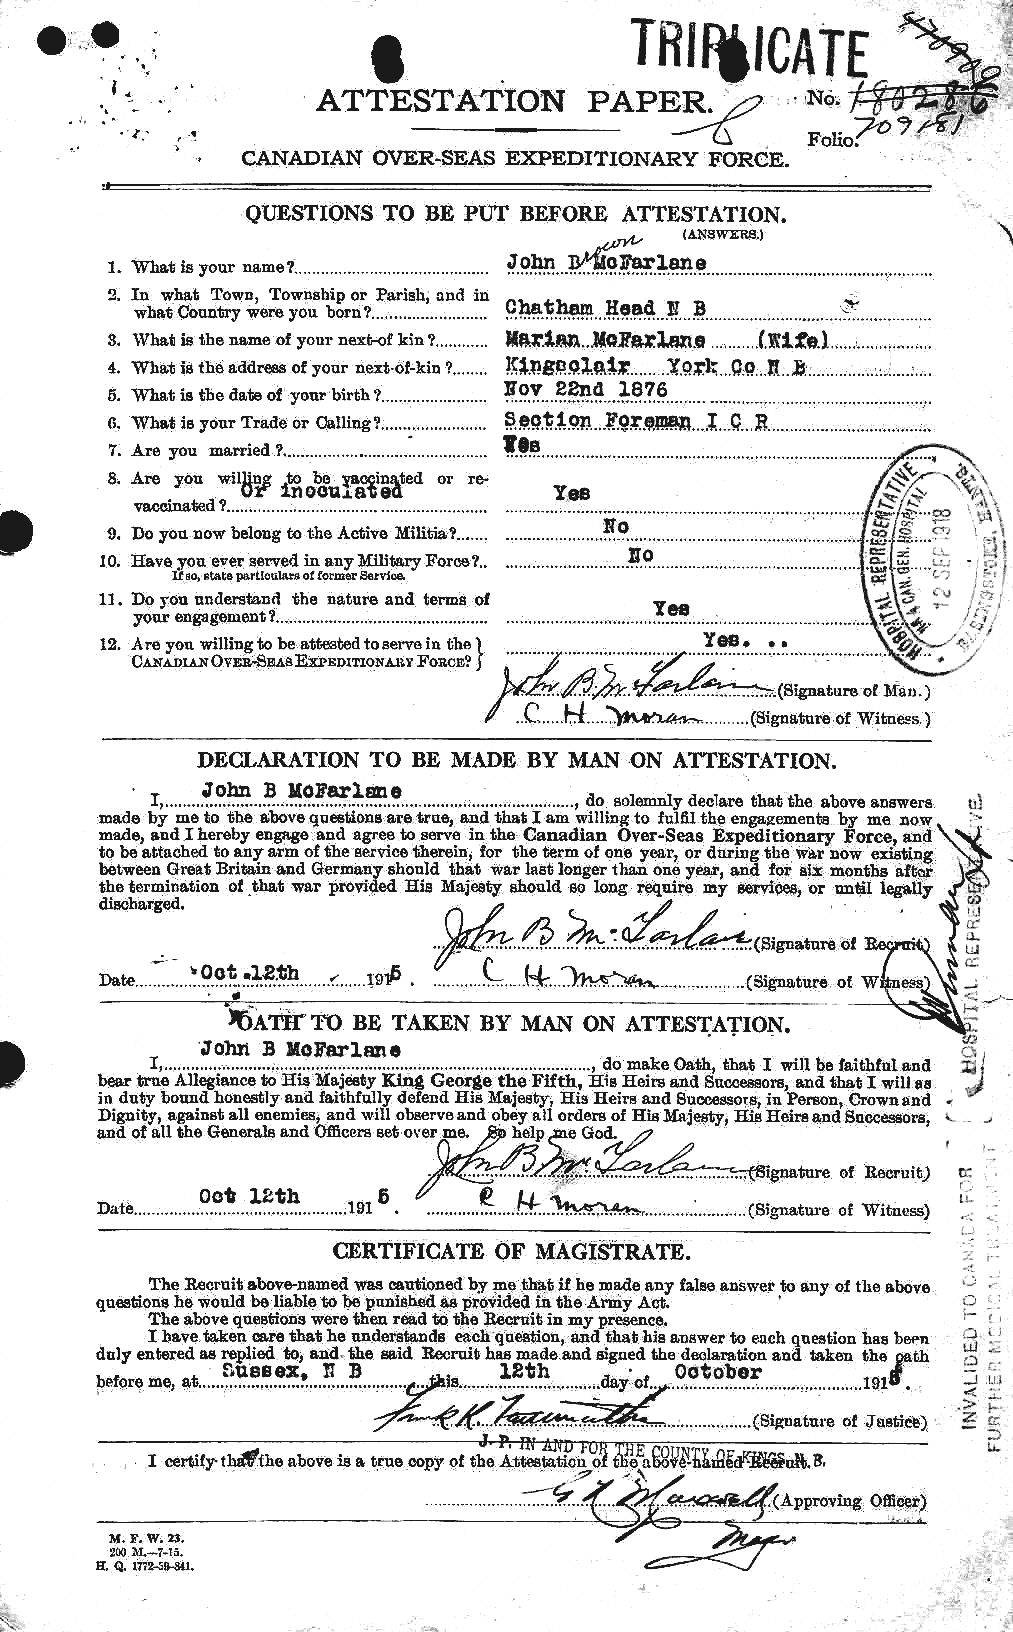 Personnel Records of the First World War - CEF 522682a